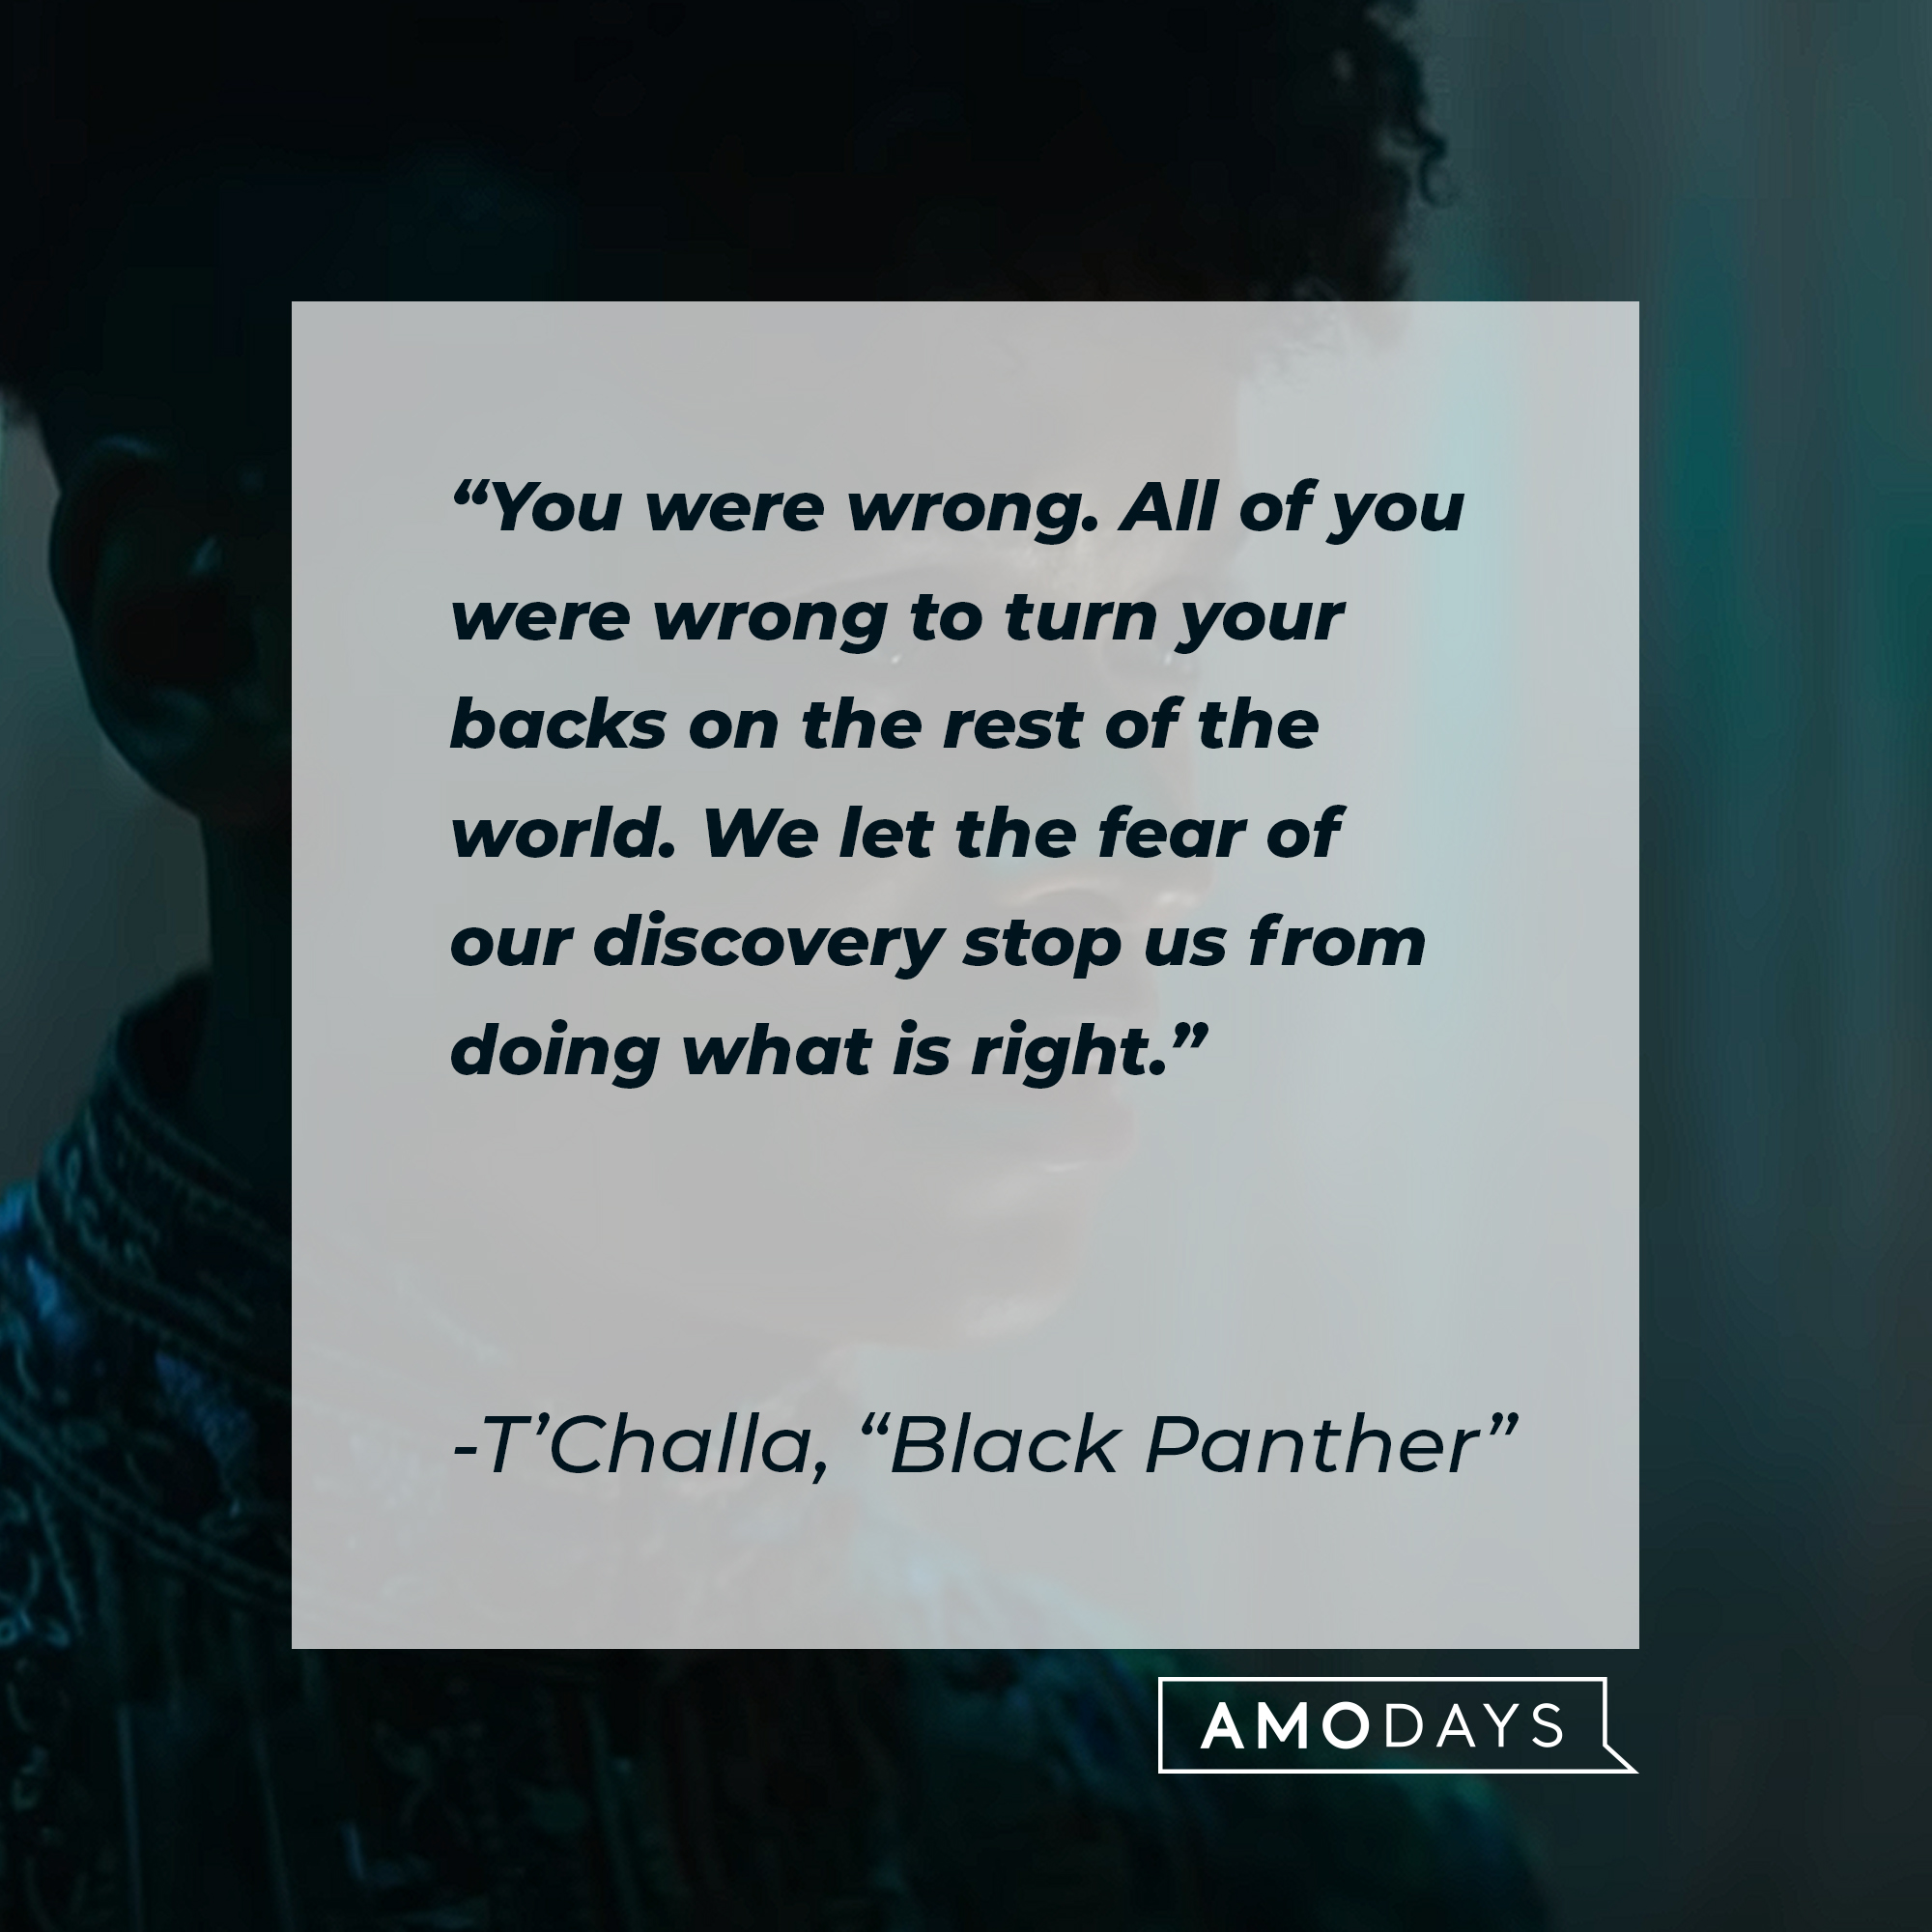 Shuri's quote from "Wakanda Forever:" “You were wrong. All of you were wrong to turn your backs on the rest of the world. We let the fear of our discovery stop us from doing what is right.” | Source: Youtube.com/marvel